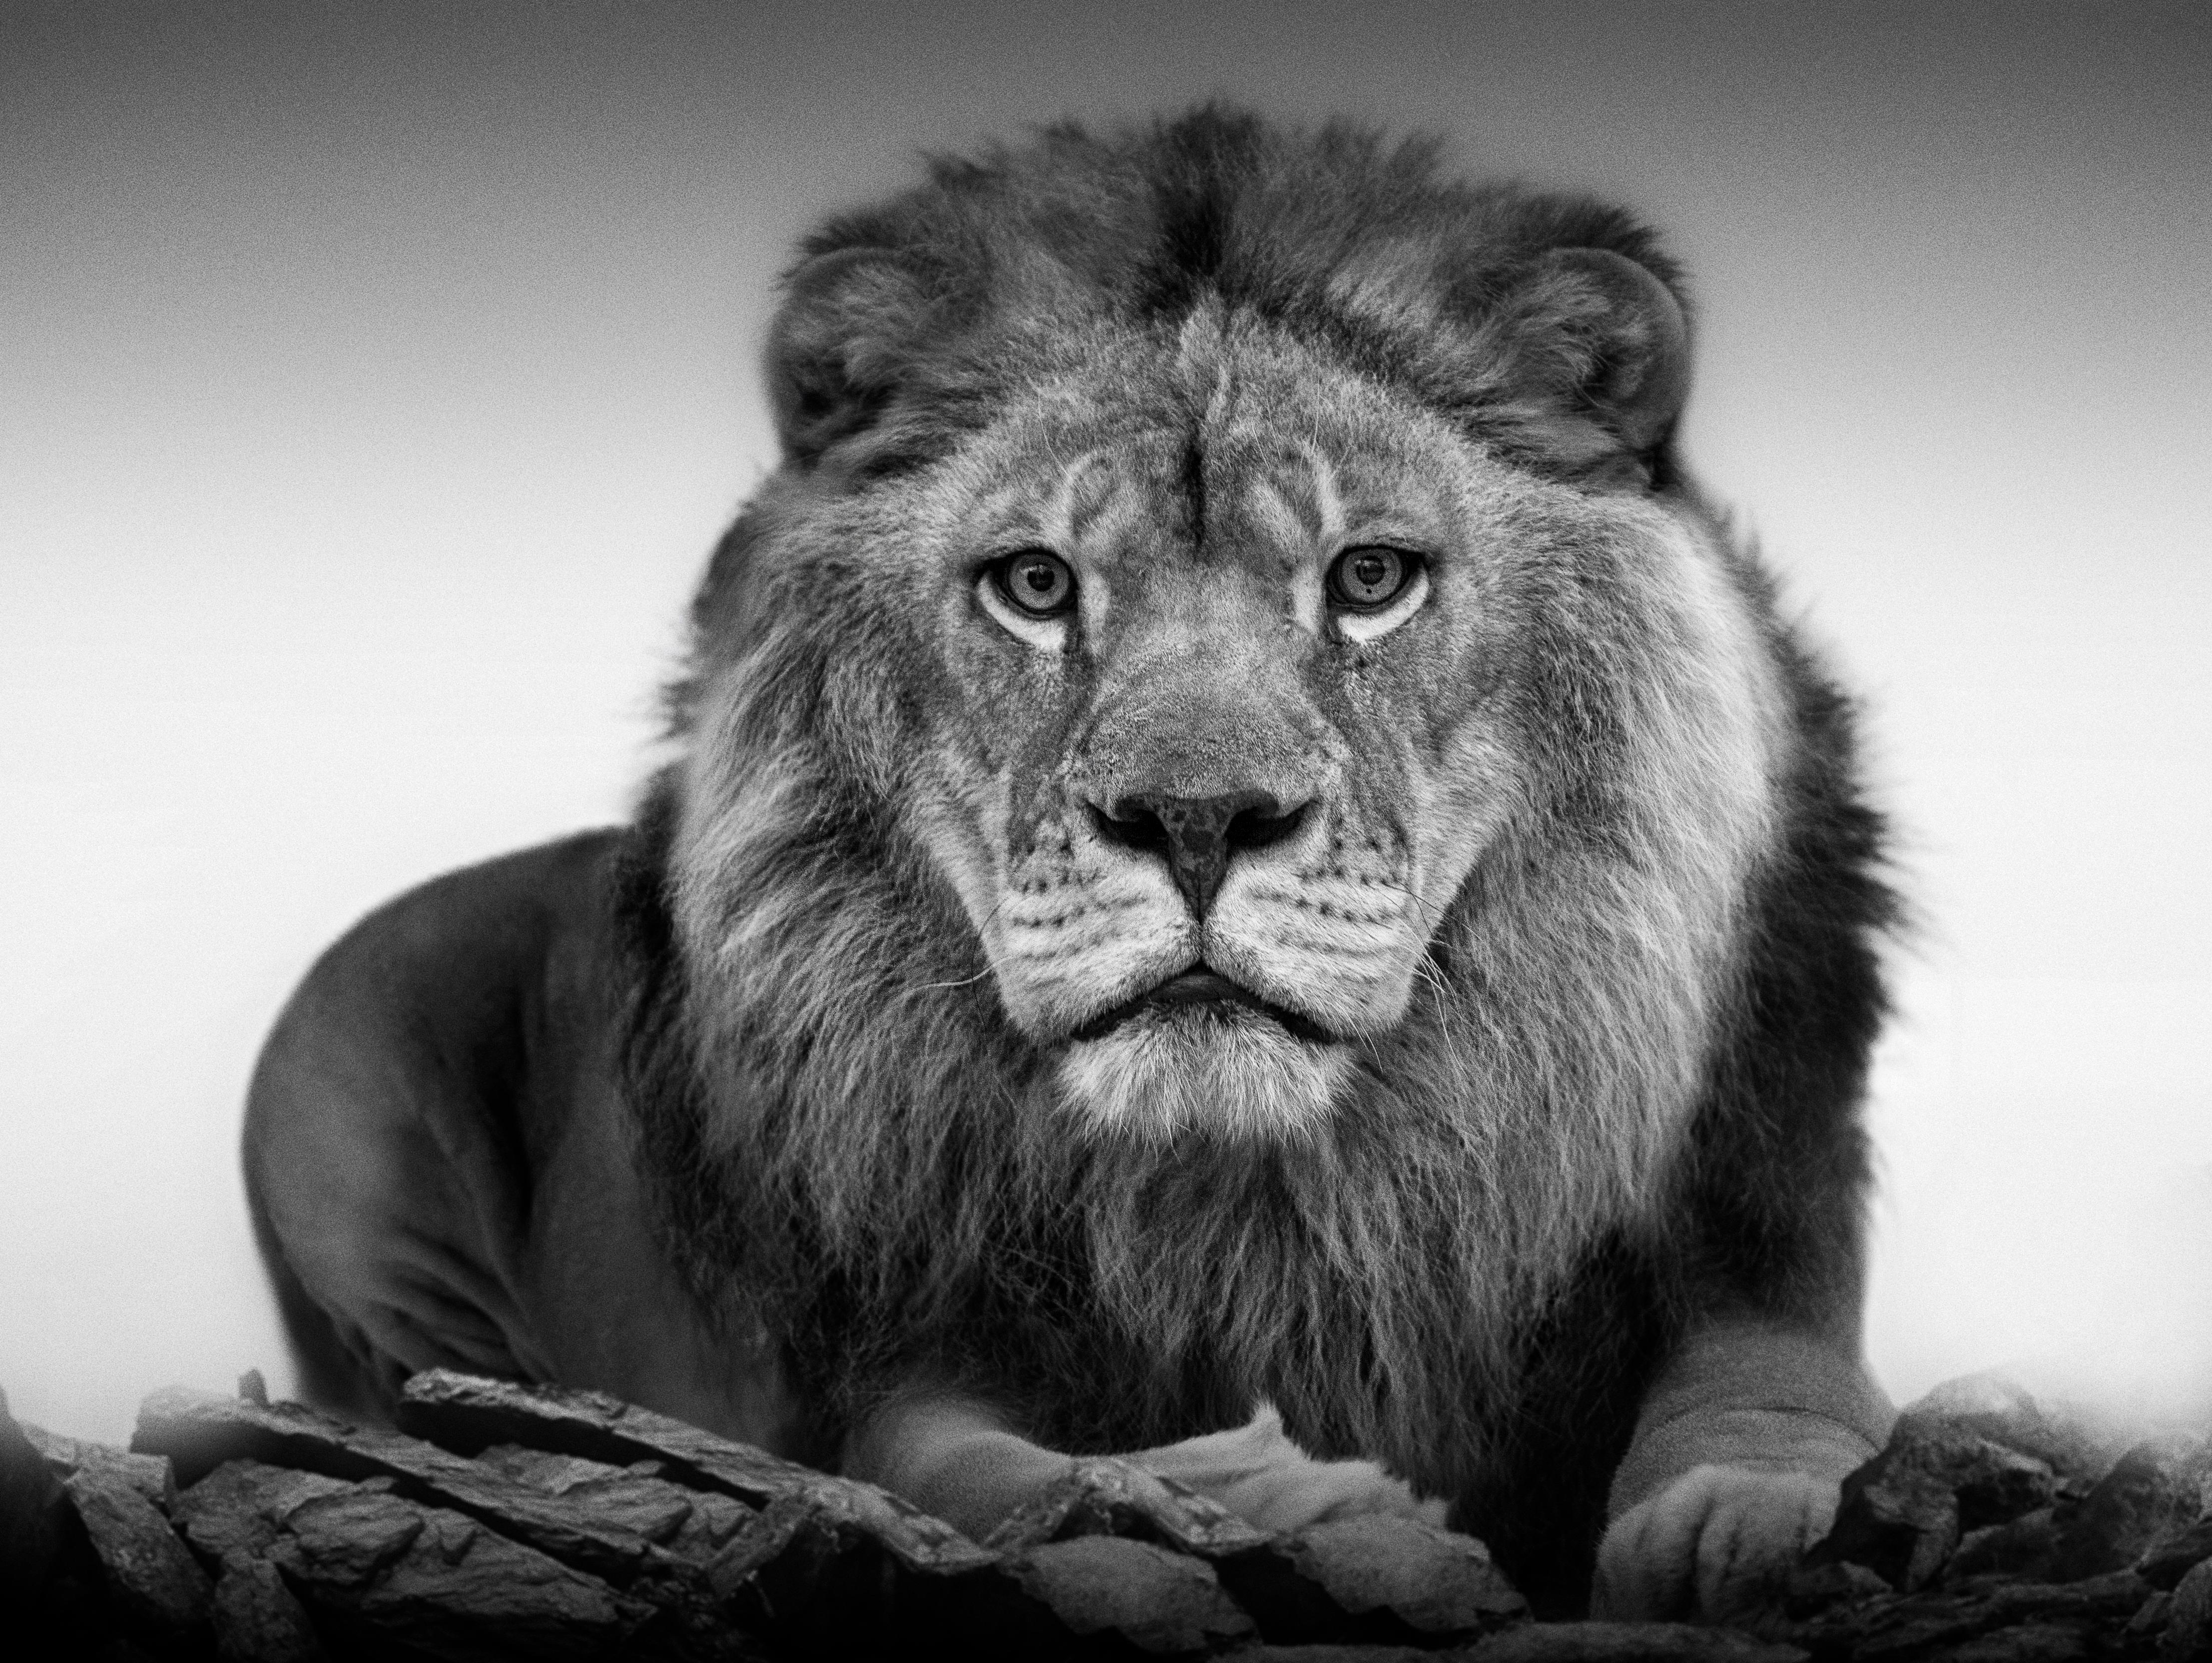 Shane Russeck Black and White Photograph -  Lion Portrait - 36x48 Black & White Photography, Unsigned test print